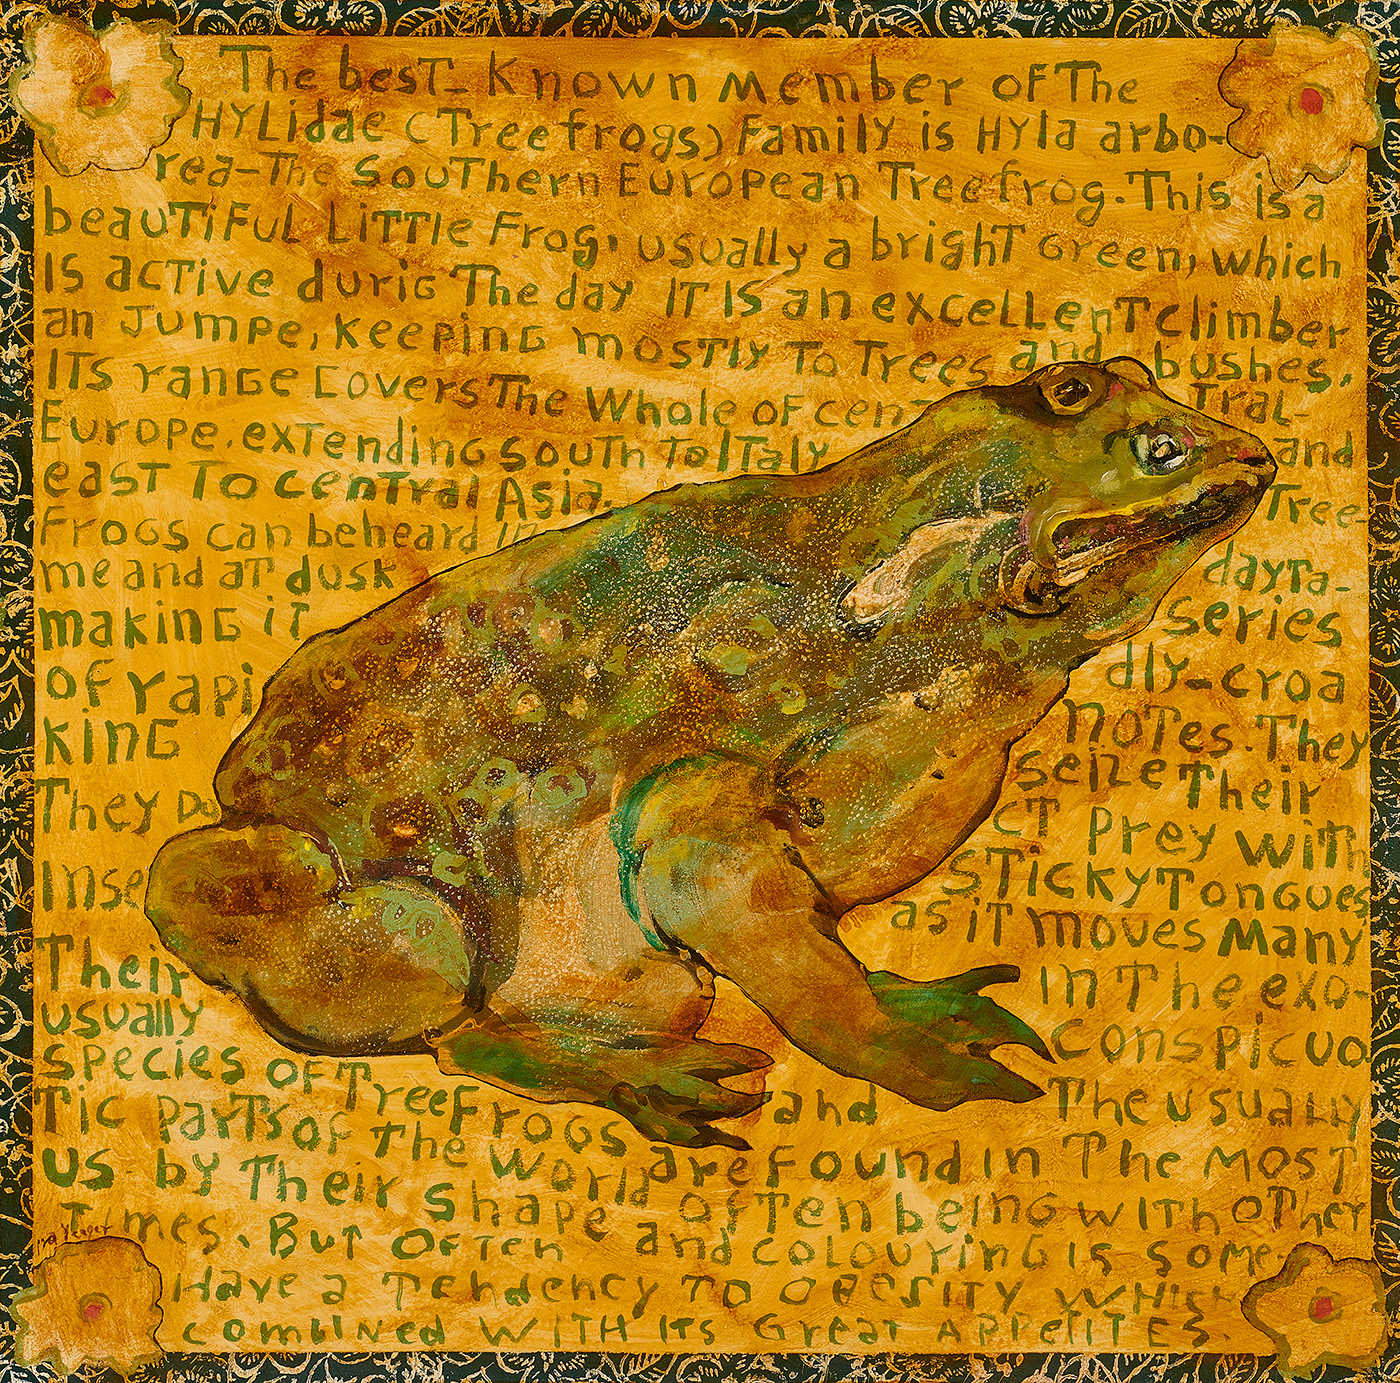 Ira Yeager, <em>The Southern European Tree Frog</em>.